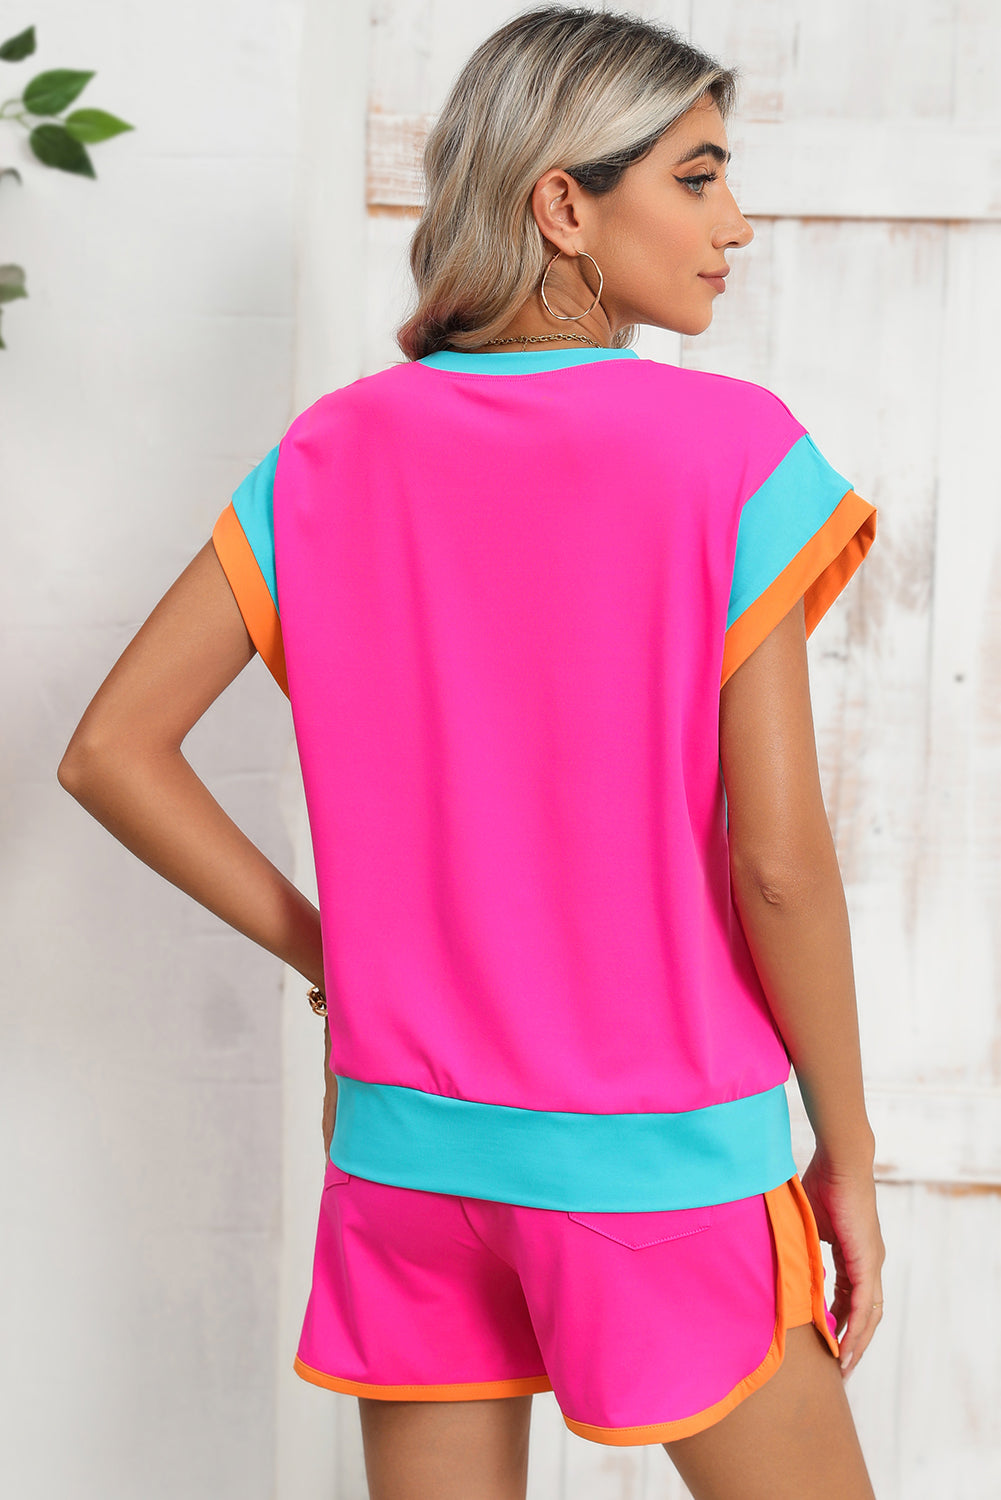 Pink and teal sporty short-sleeve top and shorts